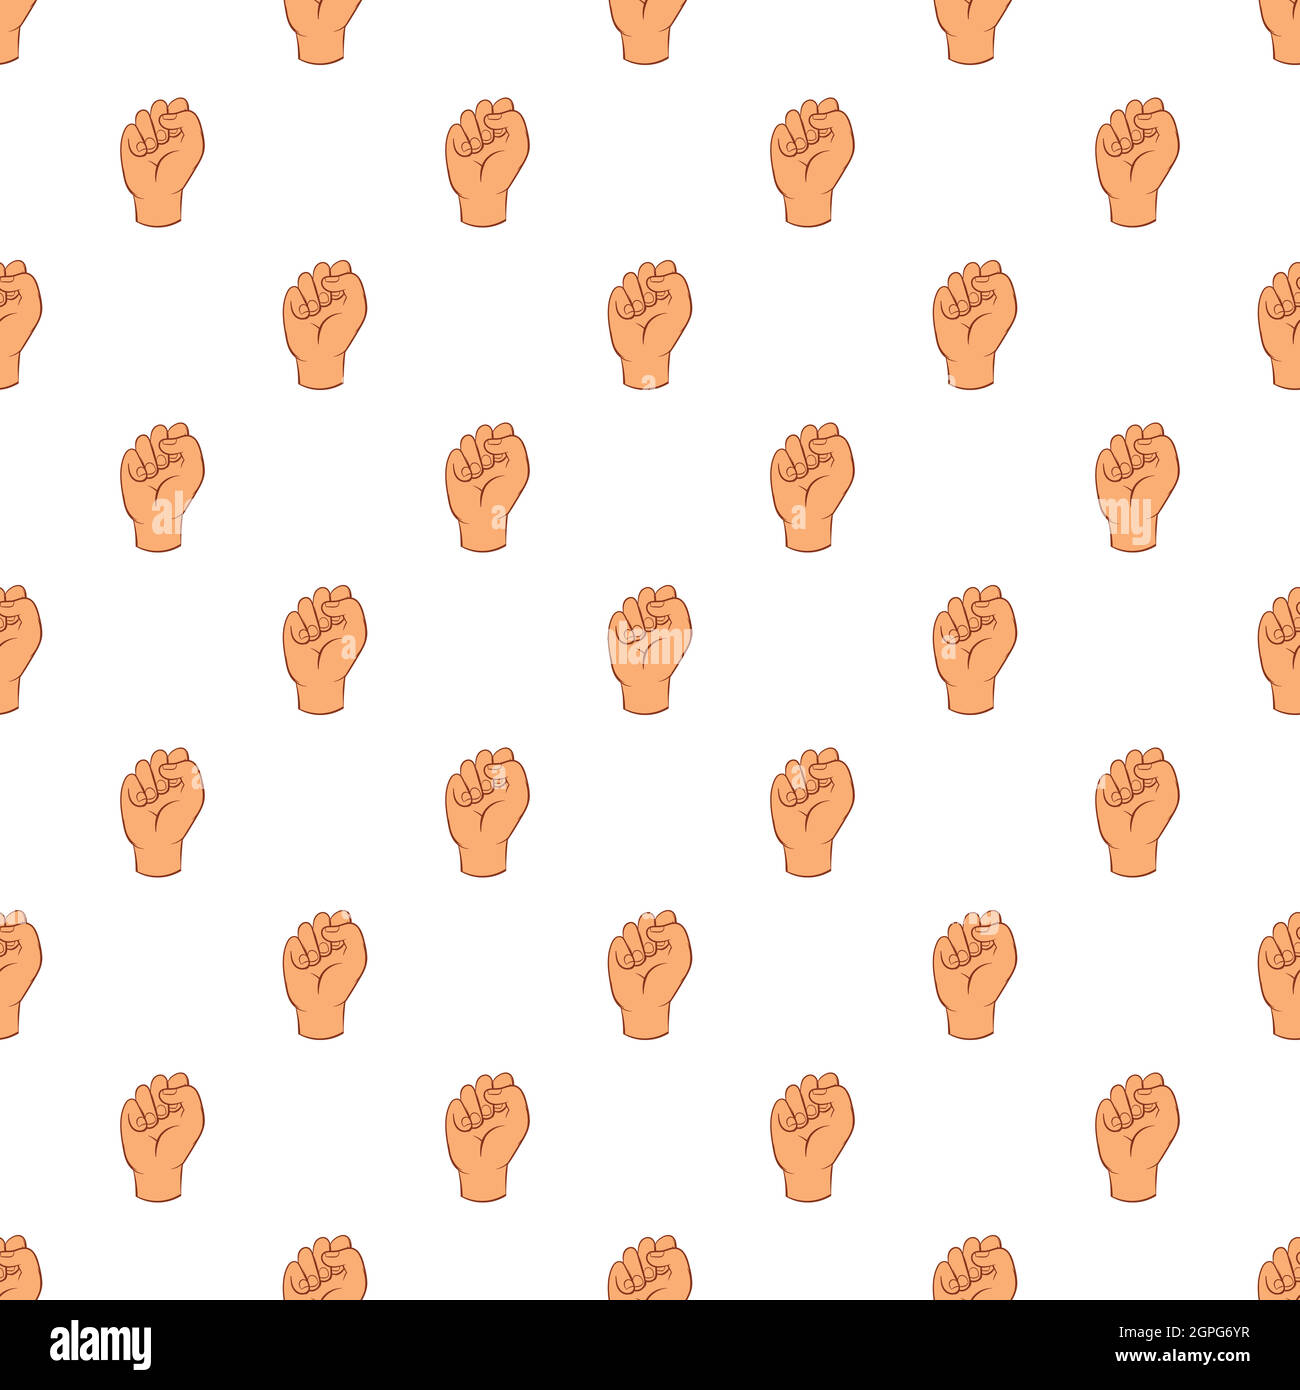 Clenched fist pattern, cartoon style Stock Vector